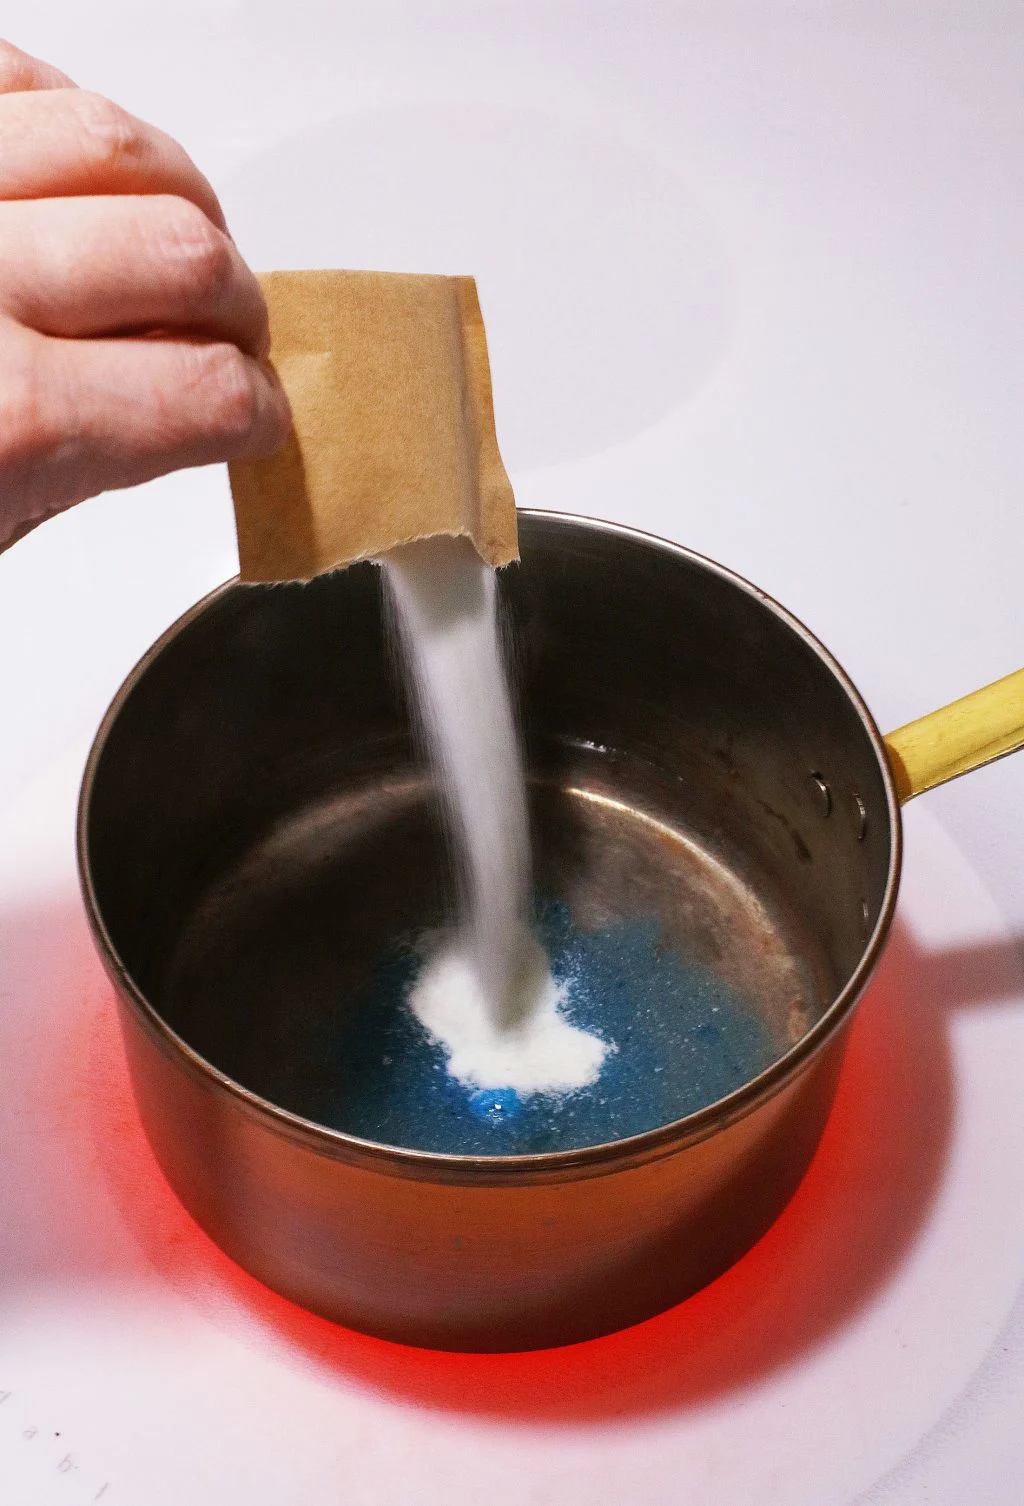 jello being poured into boiling water